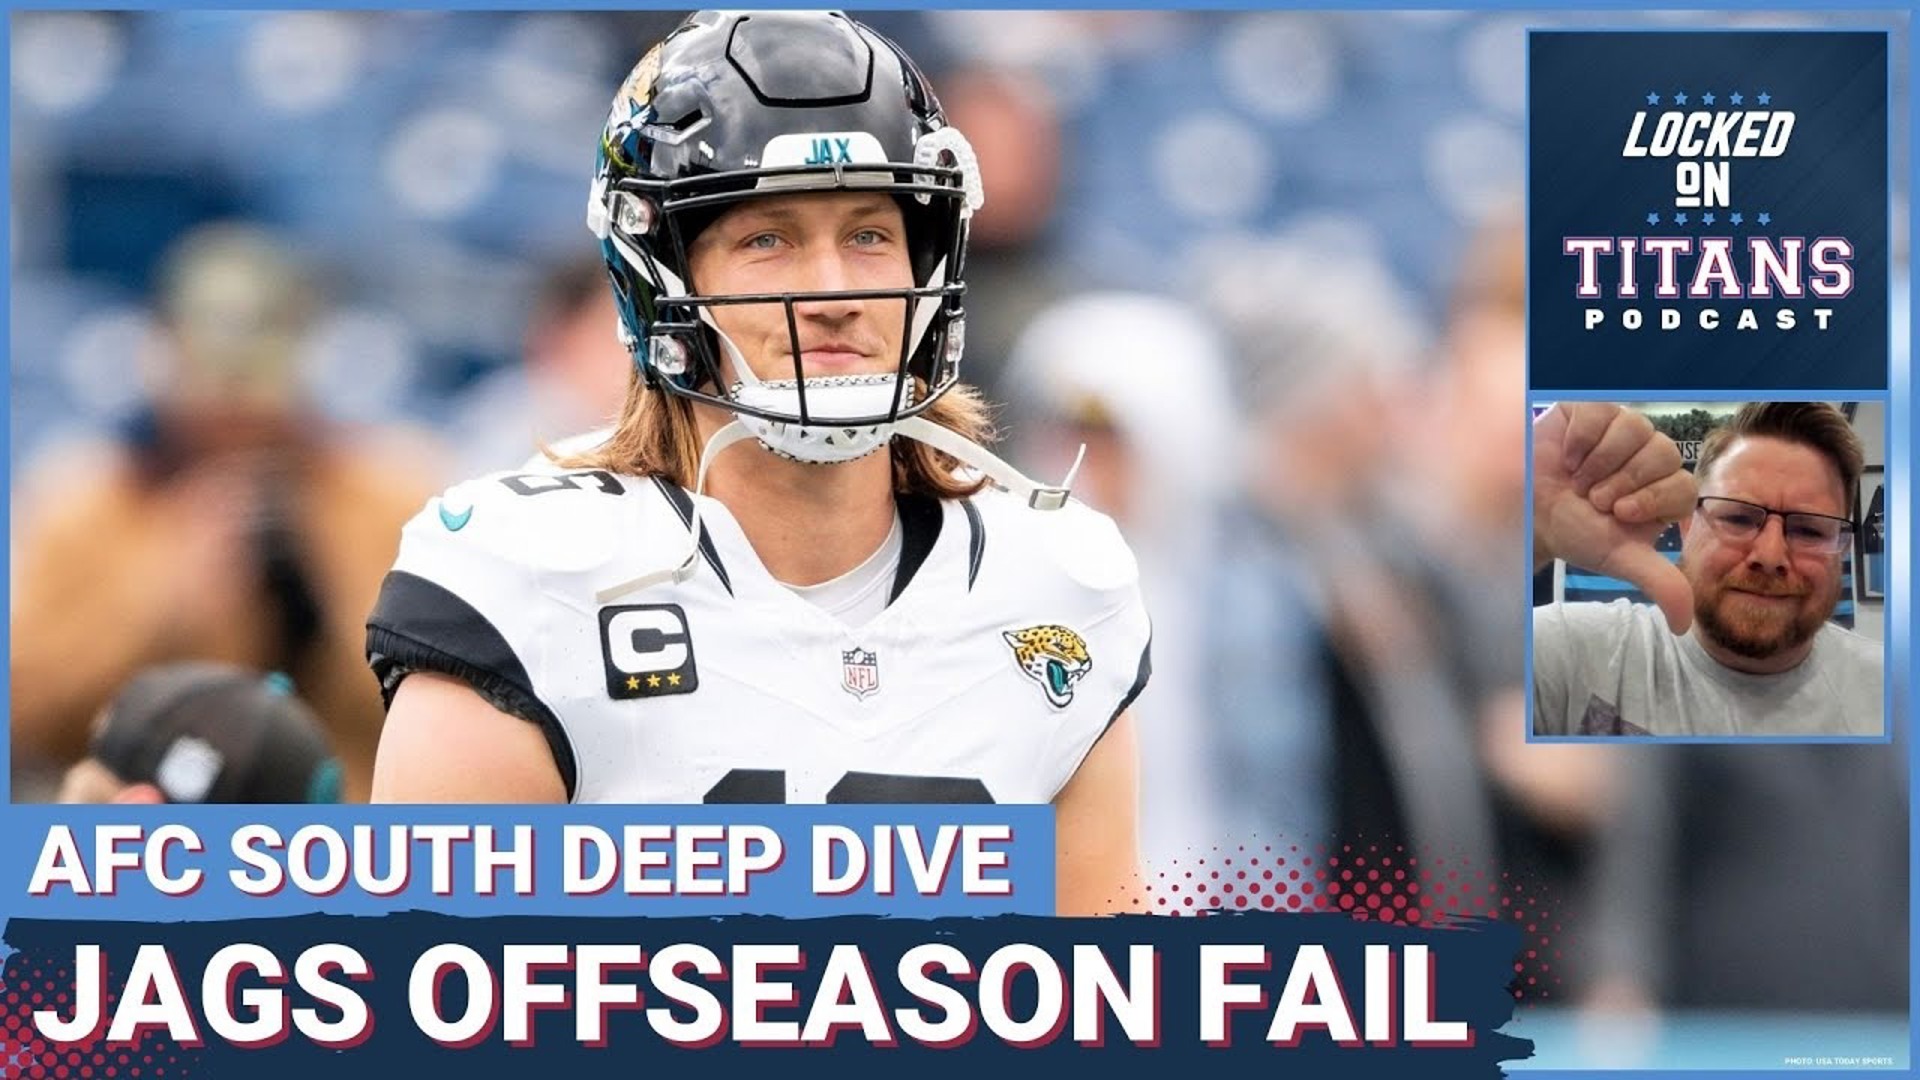 The Tennessee Titans have no fiercer rival than the Jacksonville Jaguars and both teams have gone through similar ups and downs in recent years.